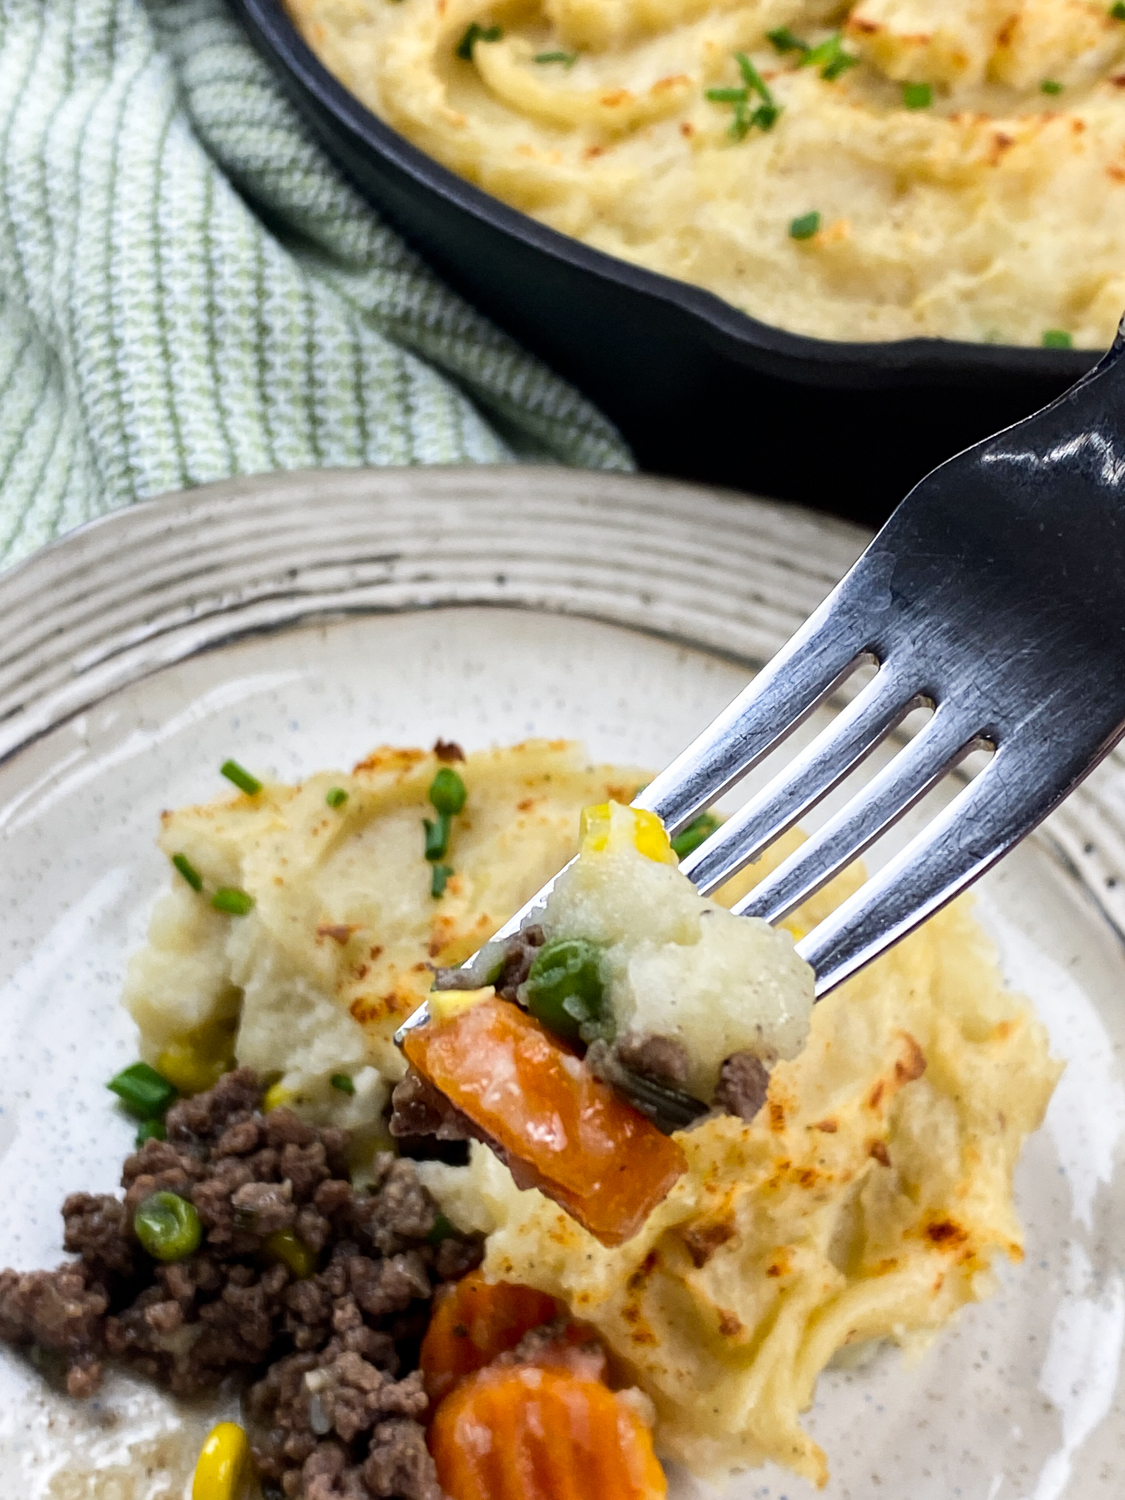 This recipe for cast iron skillet shepherd’s pie makes a hearty, comforting meal that is also perfect for sharing with family and friends.